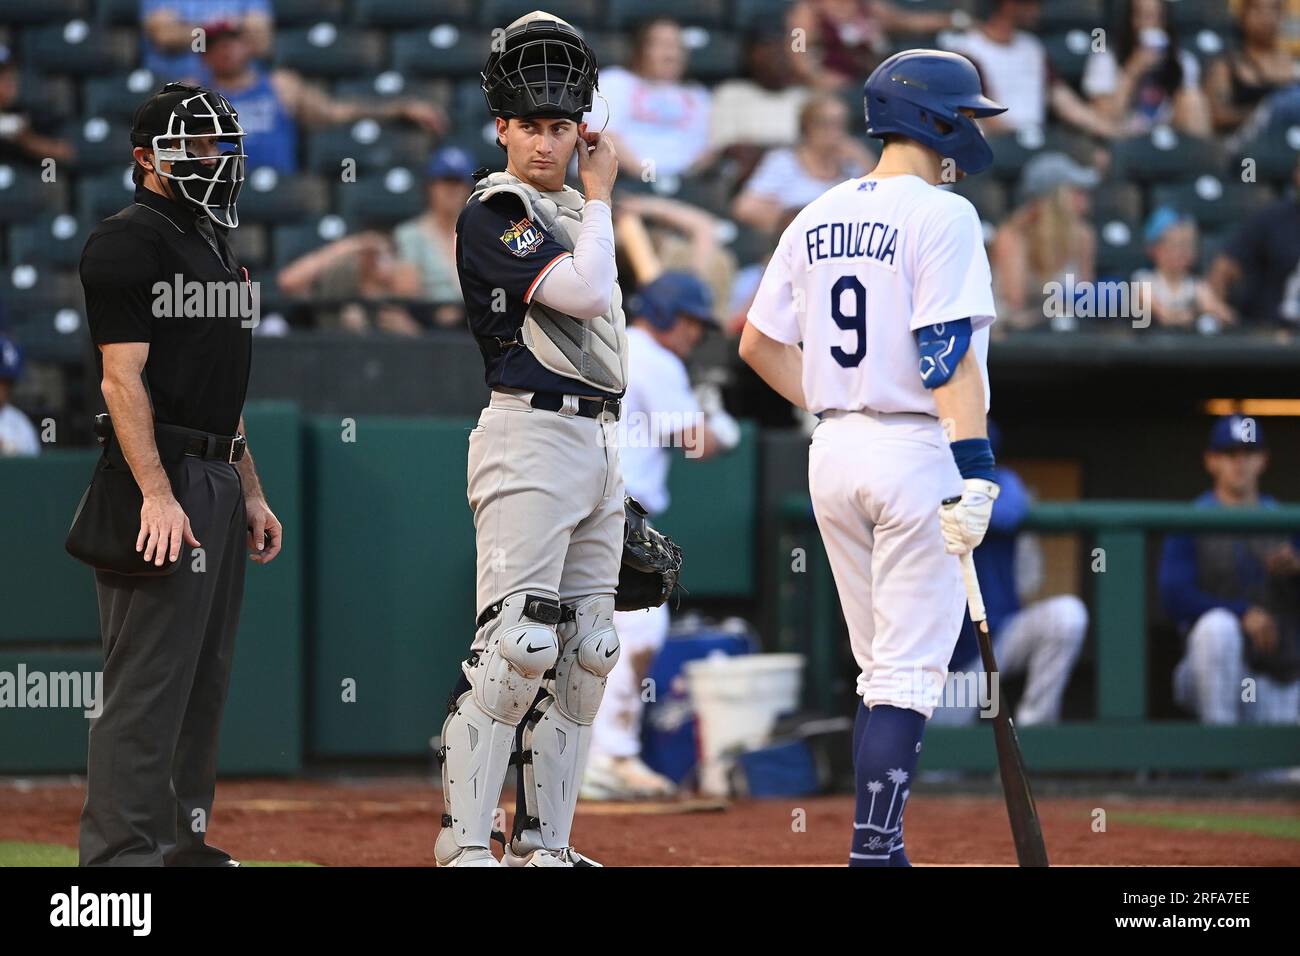 Catcher Tyler Soderstrom (21) of the Las Vegas Aviators stands behind home  plate waiting for the start of the inning in the game against the Oklahoma  City Dodgers on June 21, 2023